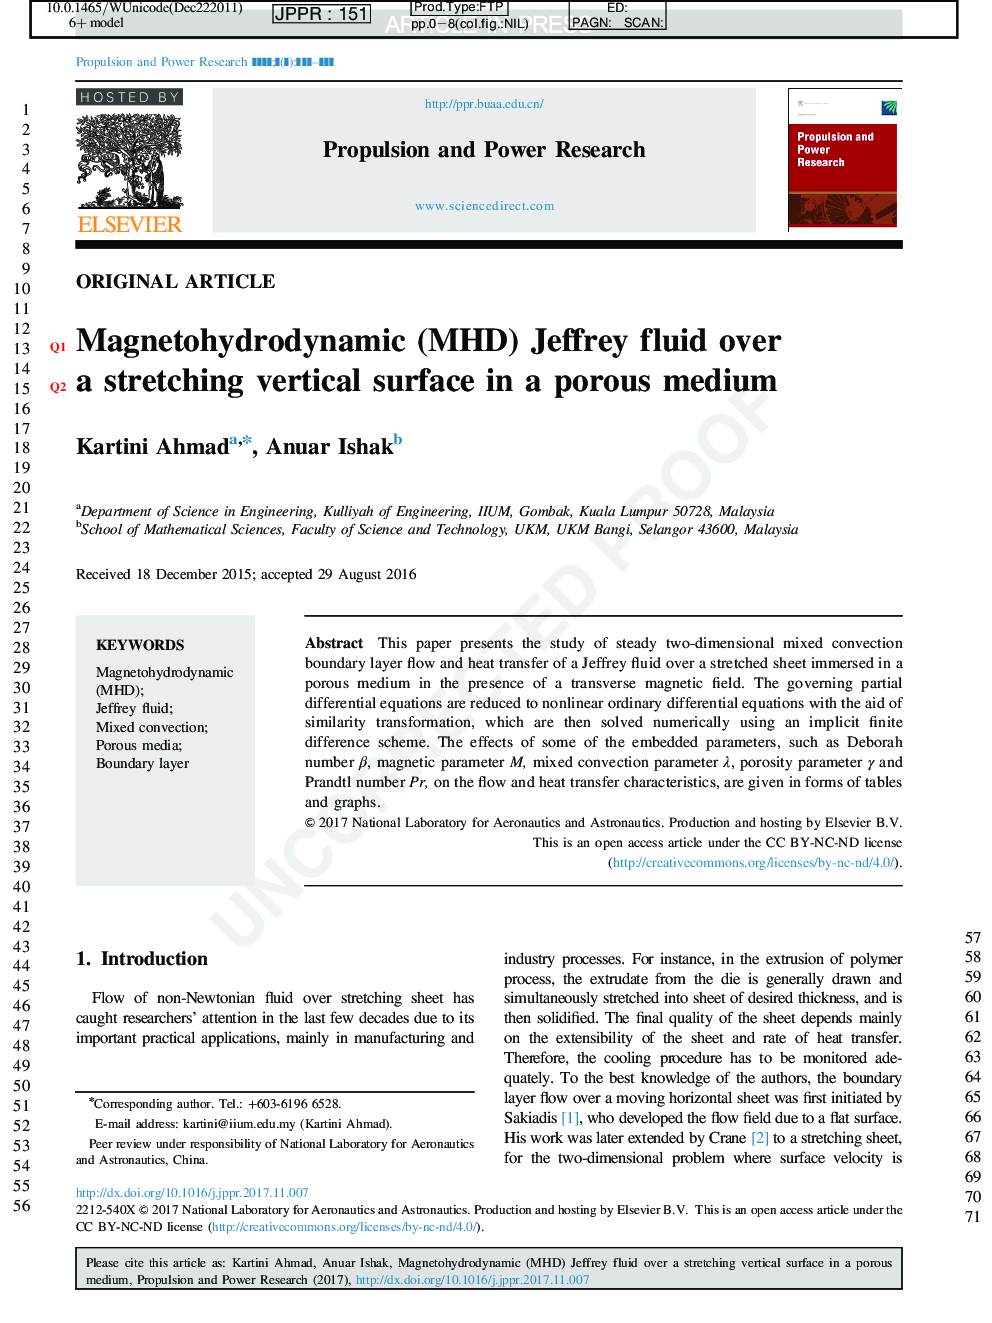 Magnetohydrodynamic (MHD) Jeffrey fluid over a stretching vertical surface in a porous medium